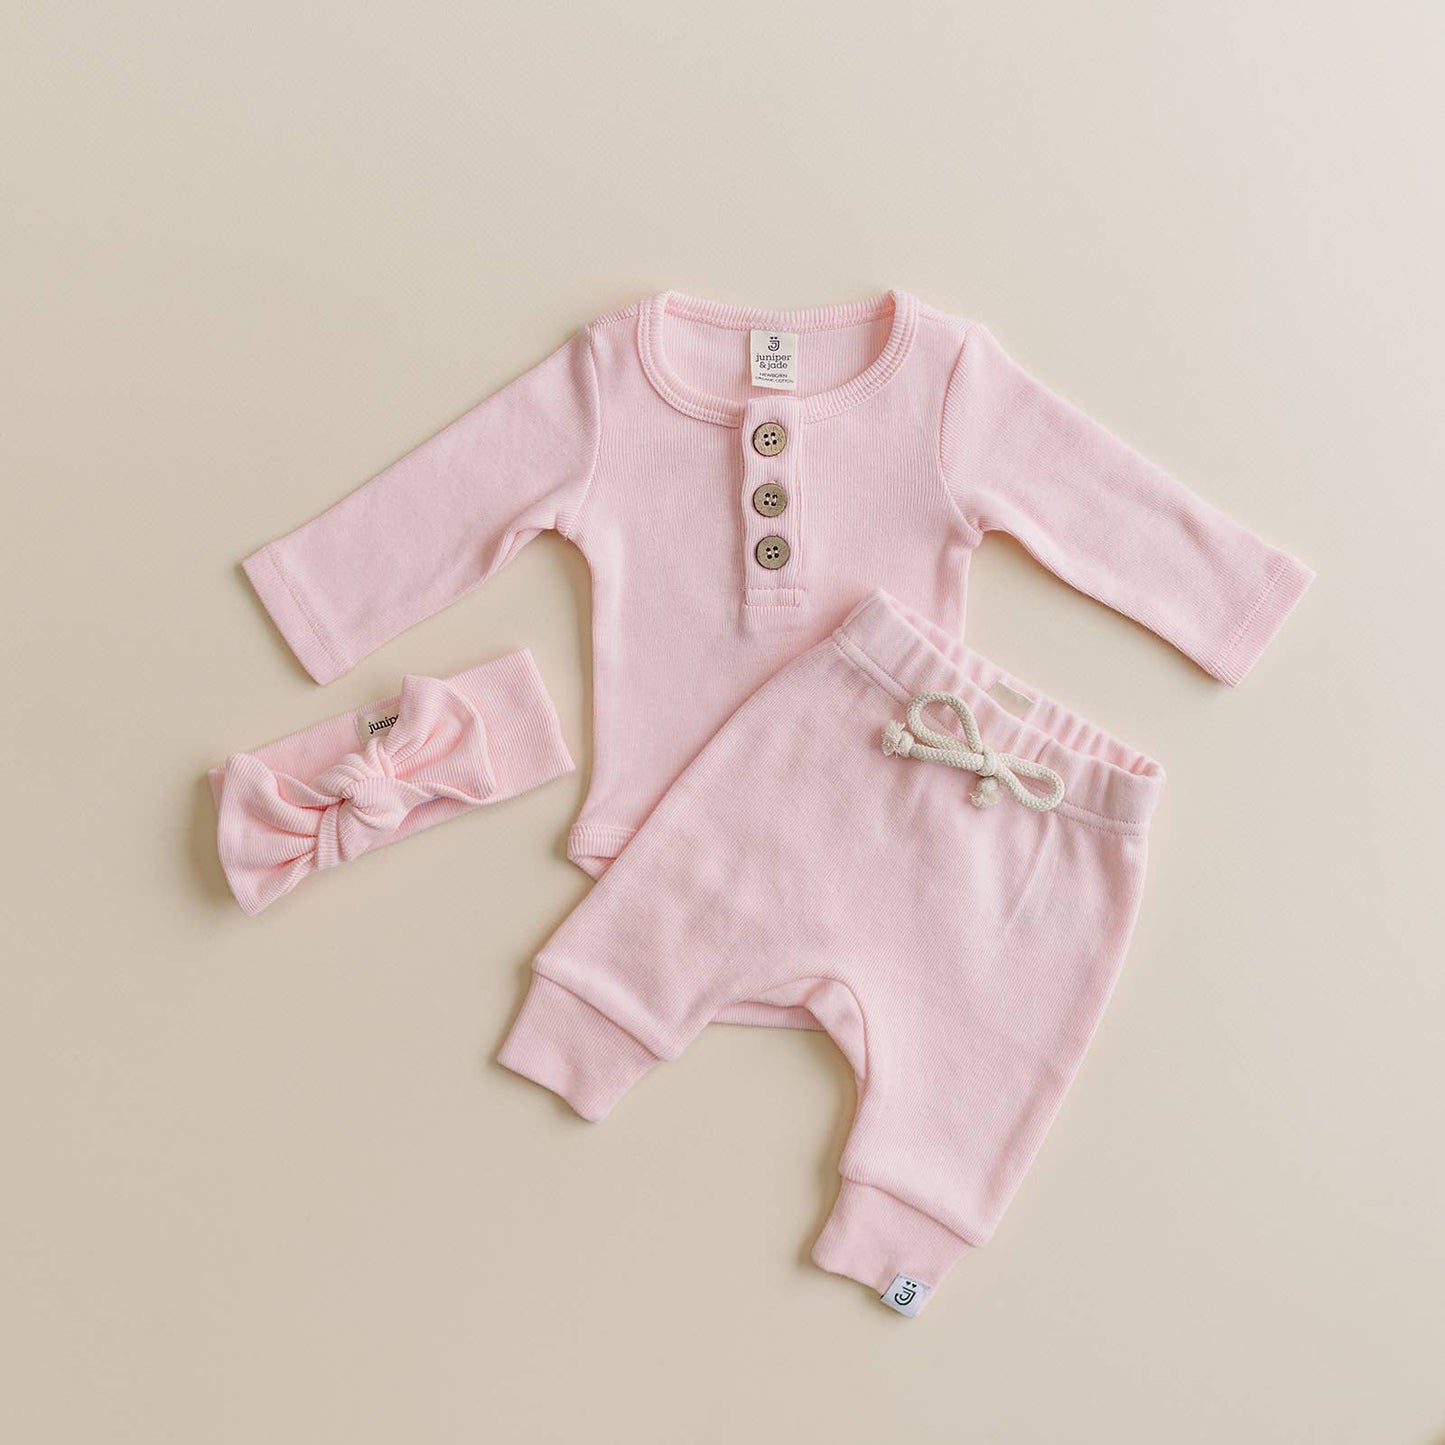 Load image into Gallery viewer, Organic 3 Button Bodysuit | Pink
